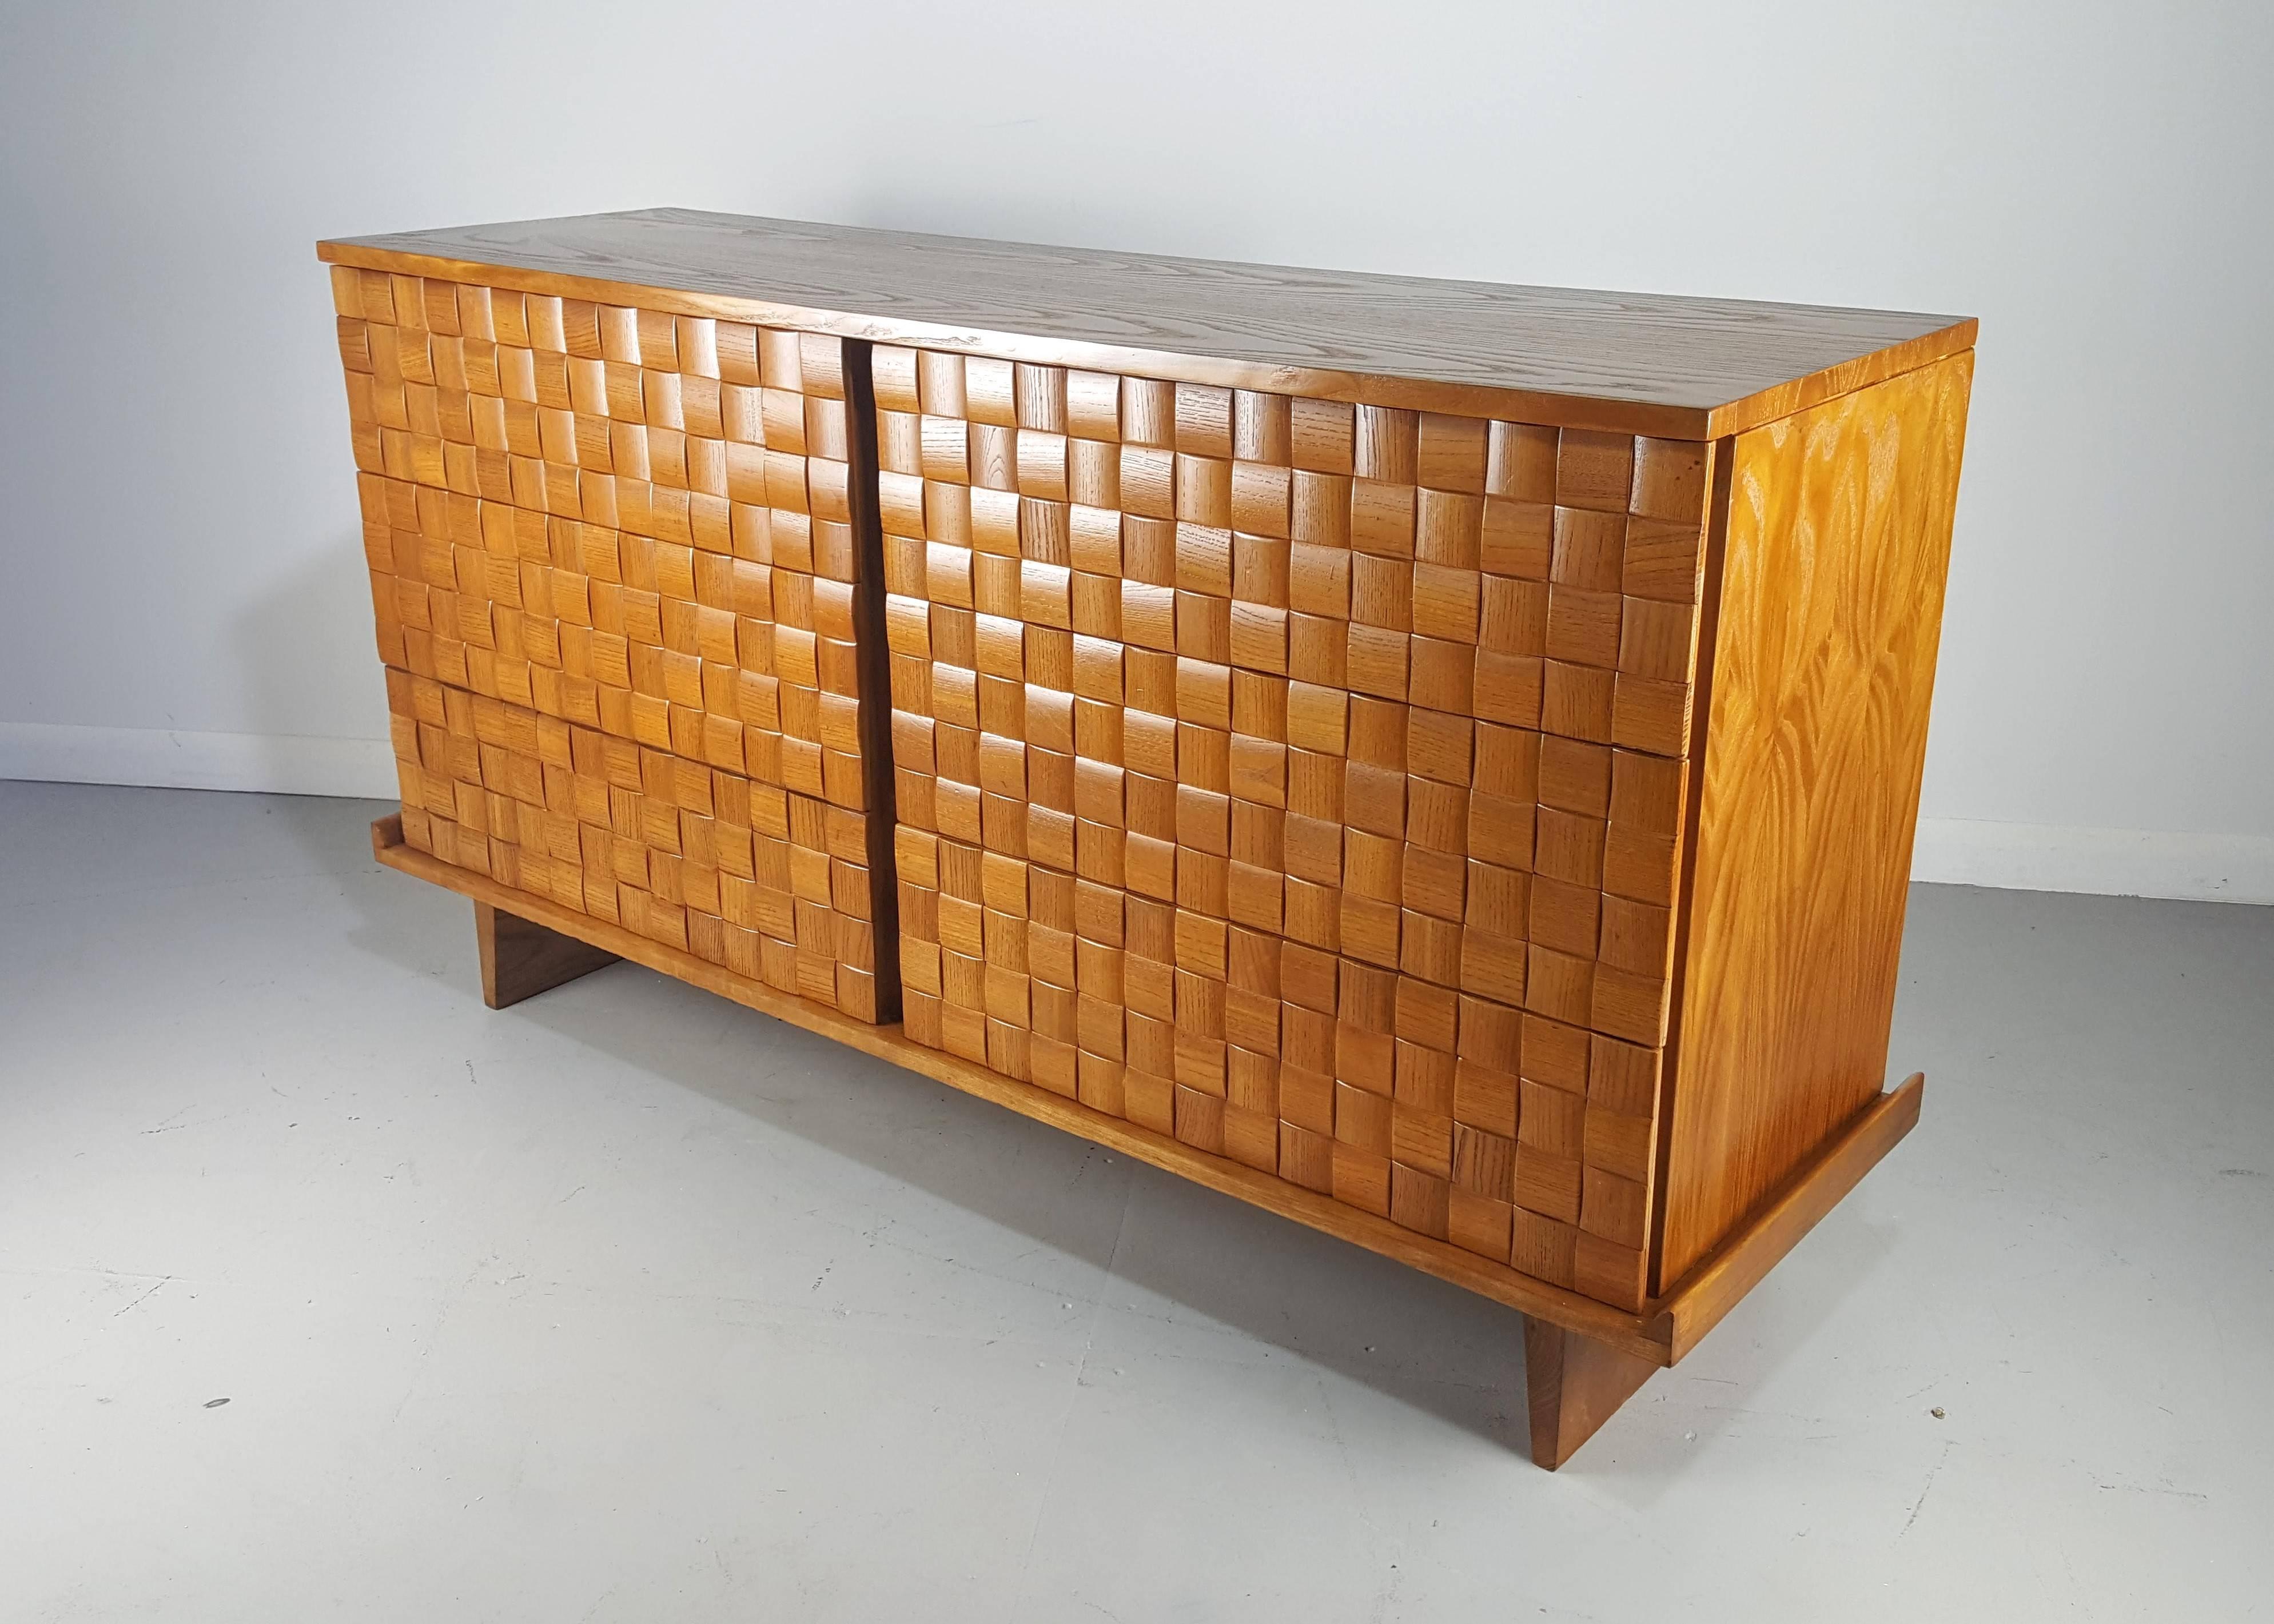 Exquisite and rare six-drawer chest or dresser by Paul Laszlo, 1950s. Solid oak construction with incredible grain throughout. His best design from this line and an absolute showstopper. It has been fully restored and is in excellent condition.